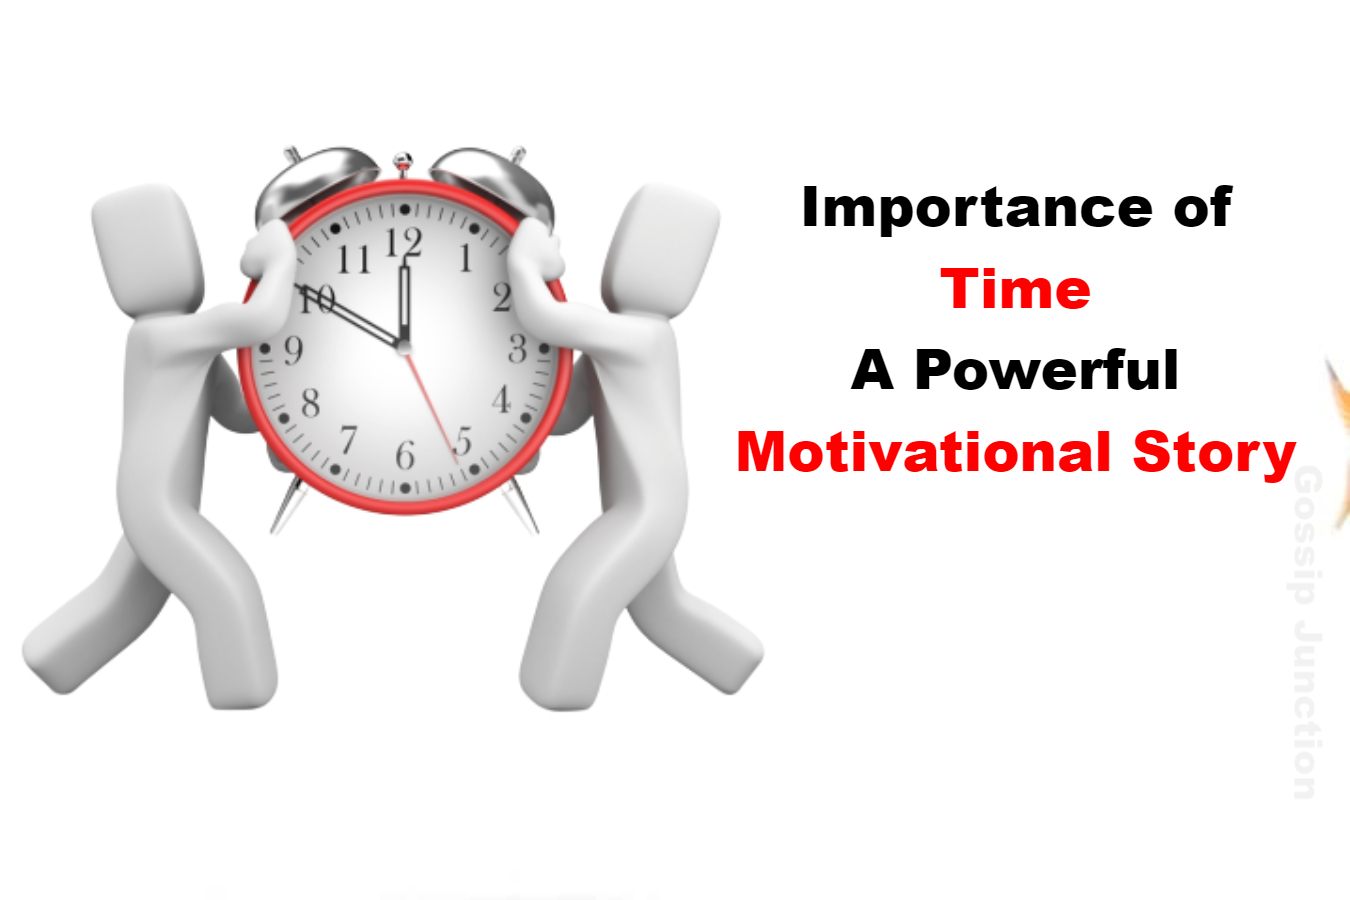 Importance of Time – Powerful Motivational Story